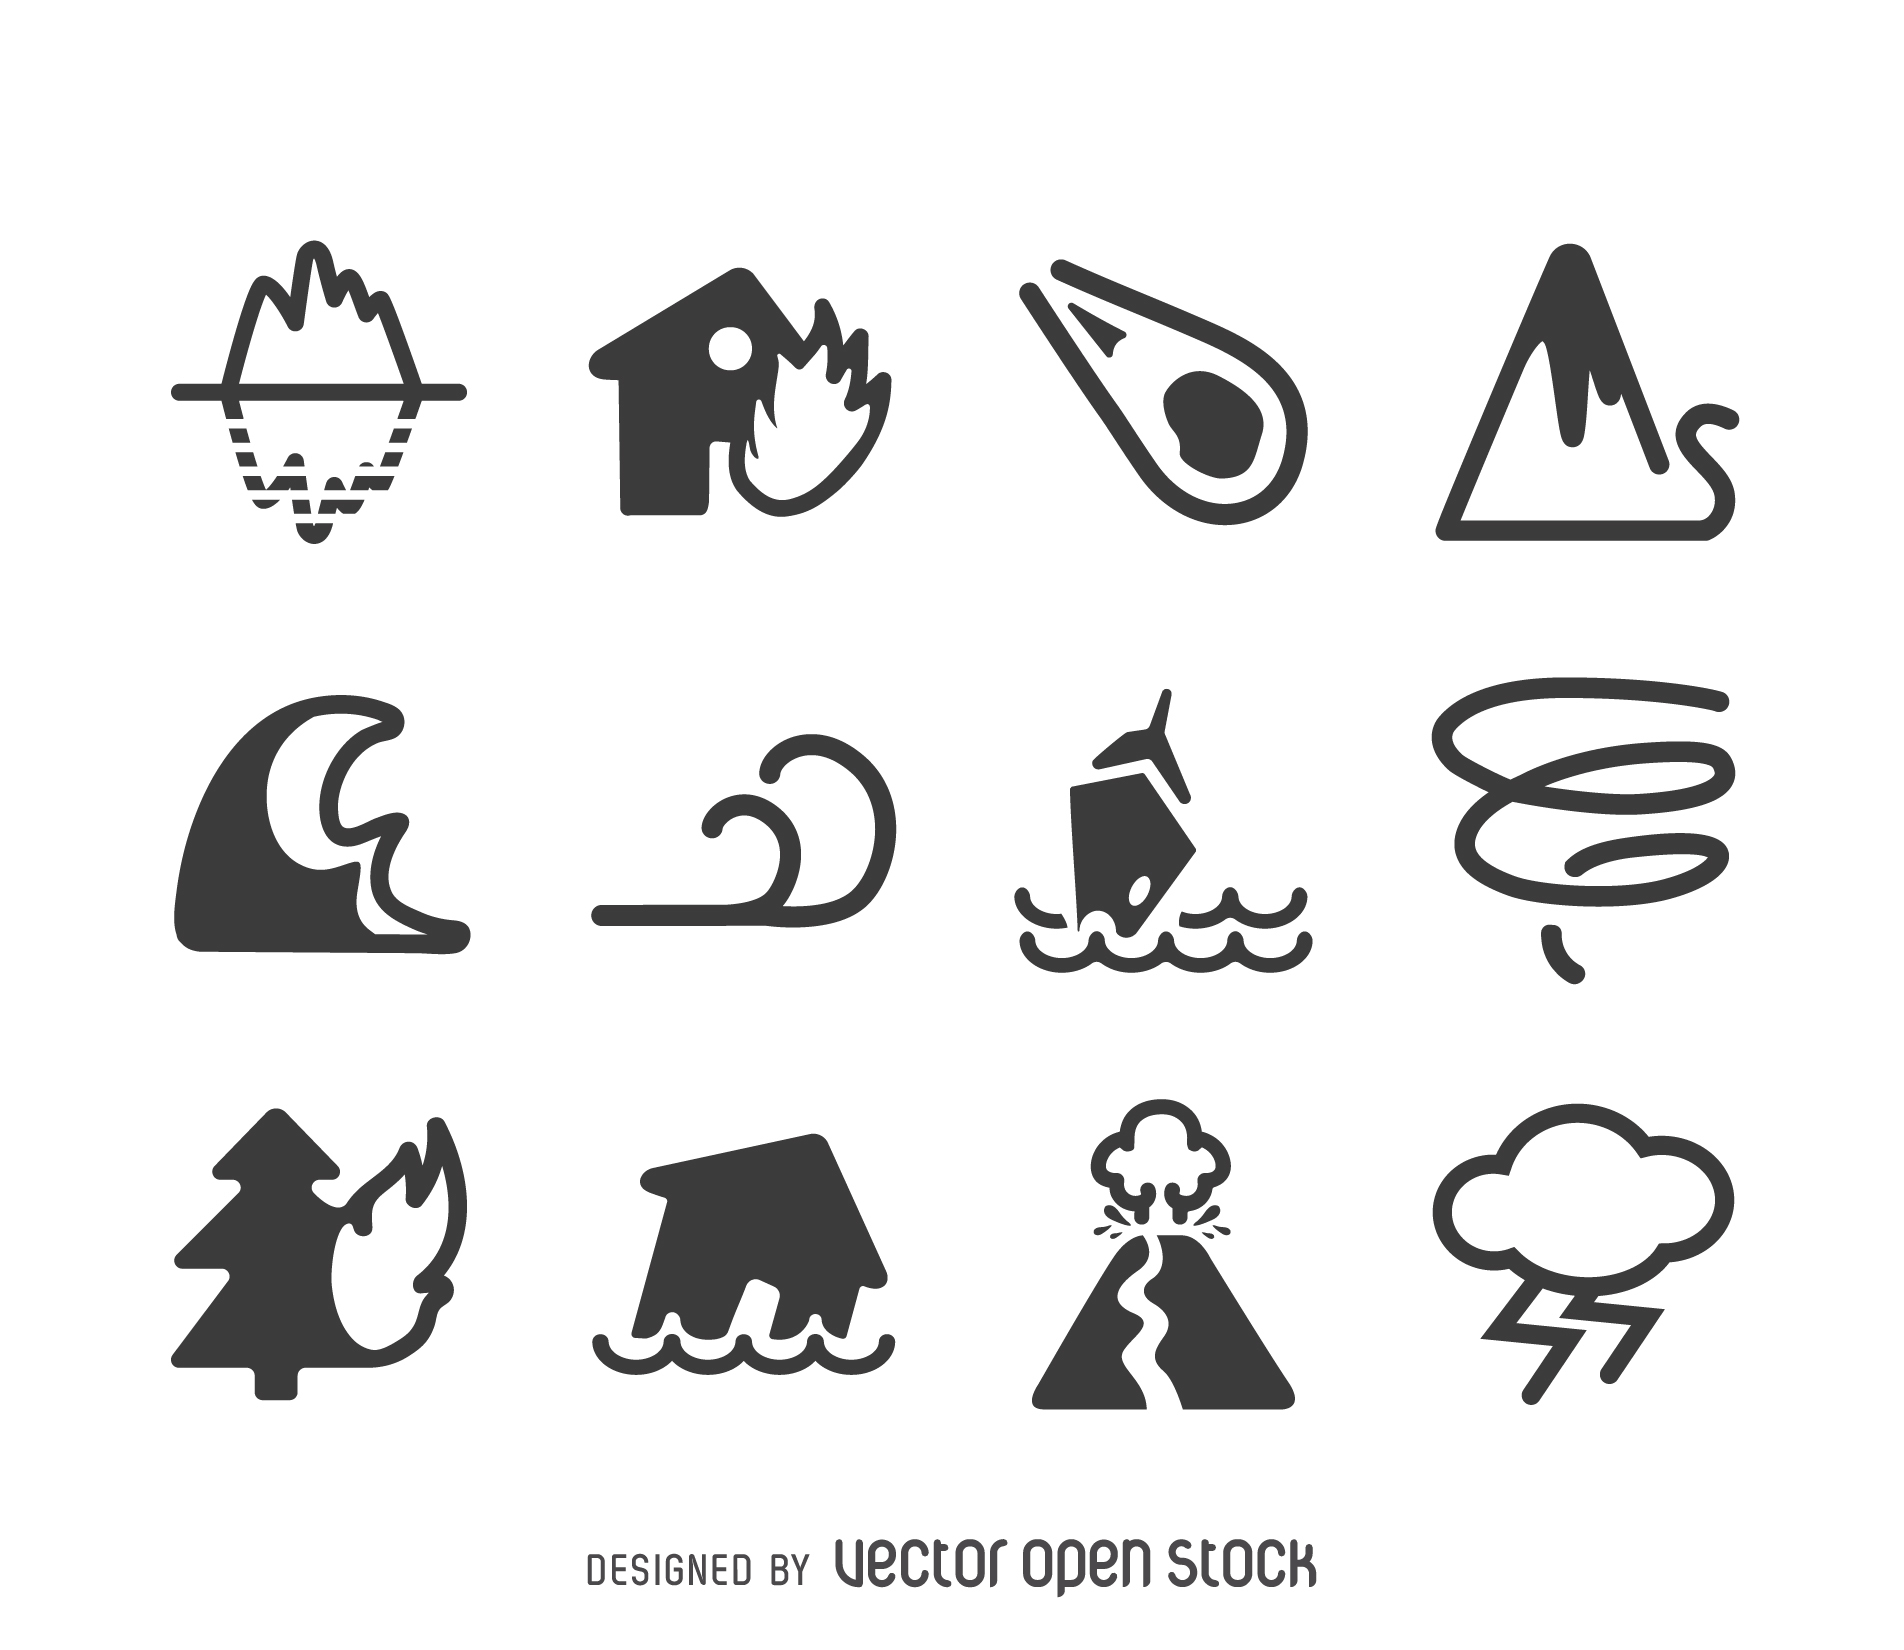 Disaster icon set in black vector illustration - Search Clipart 